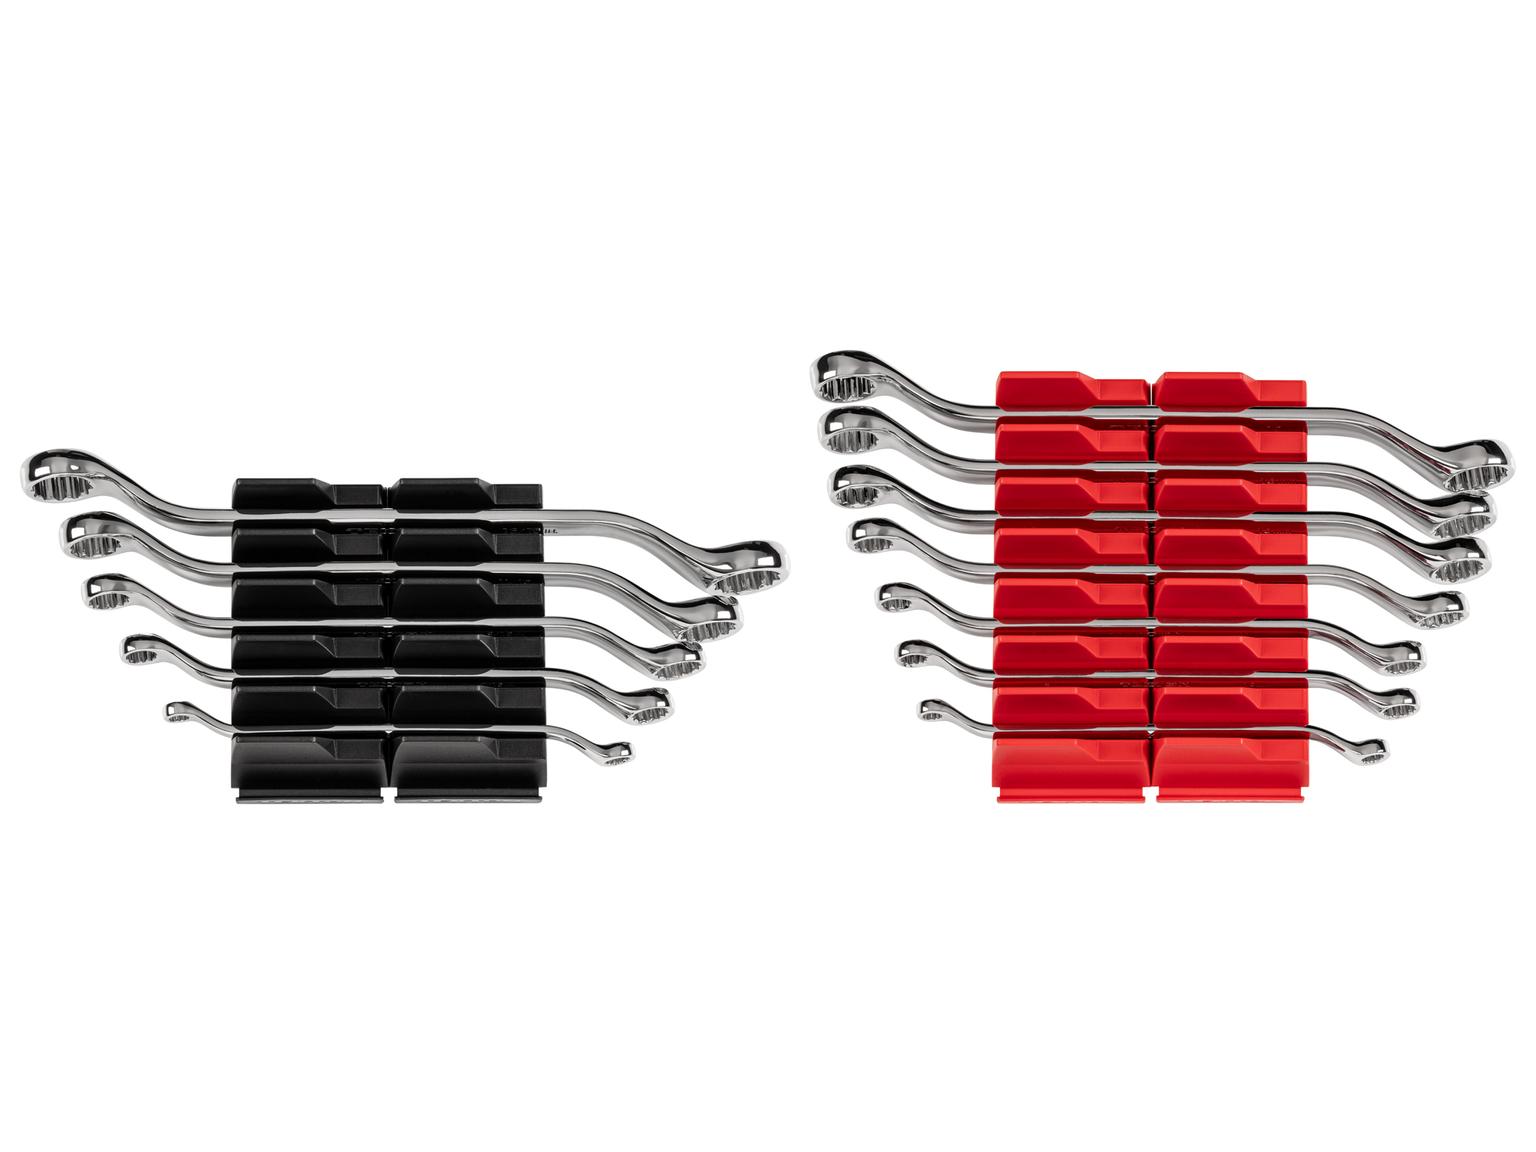 TEKTON WBE95301-T 45-Degree Offset Box End Wrench Set with Modular Slotted Organizer, 12-Piece (1/4-13/16 in., 6-19 mm)